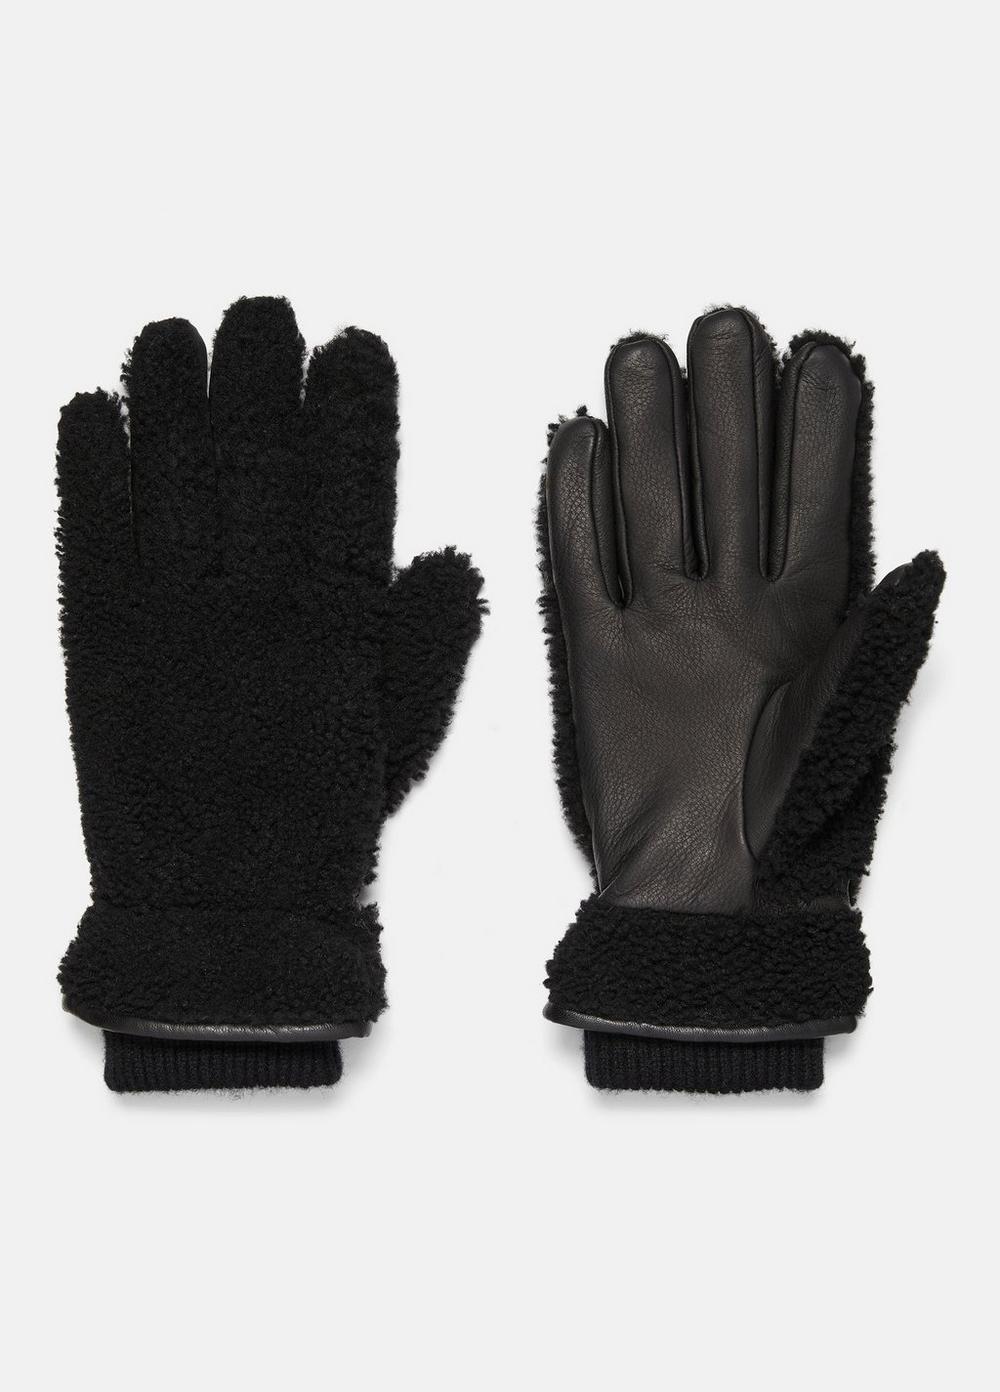 Shearling And Leather Glove, Black/black, Size L Vince